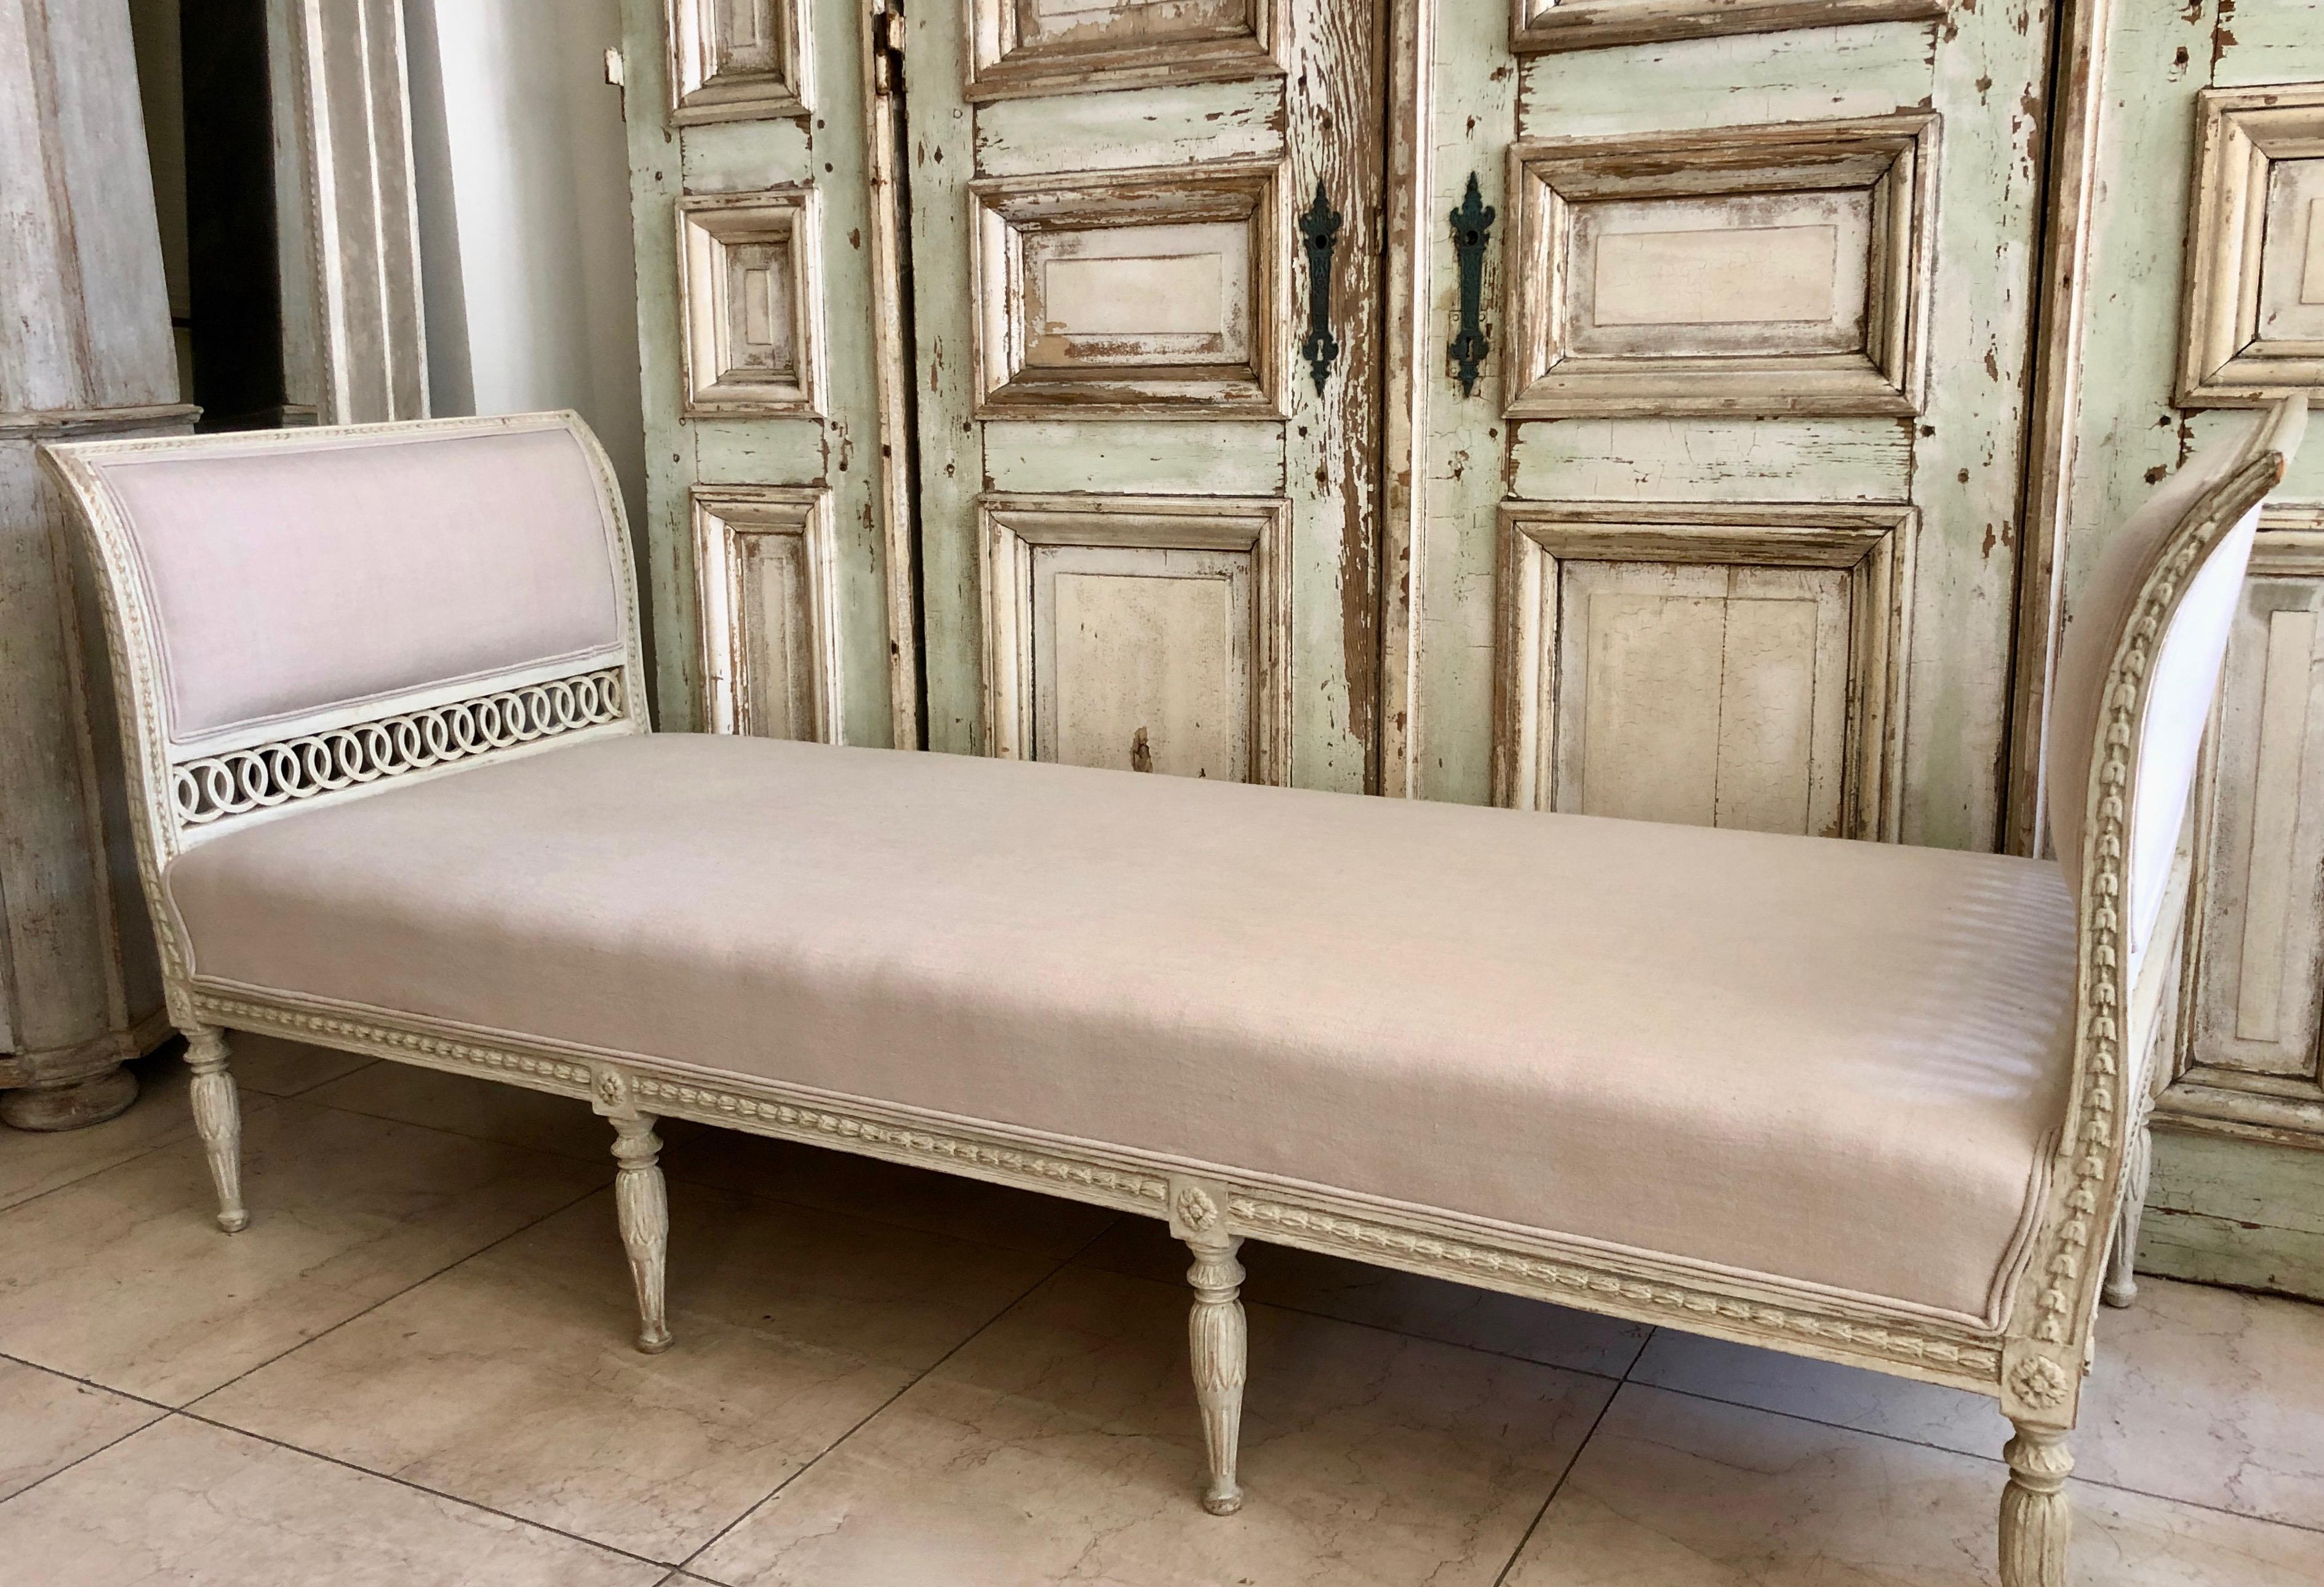 An exceptional and richly carved Swedish Settee/Daybed by Lindome furniture makers. Hand-scraped back to its original cream-white paint and upholstered in linen.
Sweden, circa 1860.
Here are few examples … surprising pieces and objects, authentic,